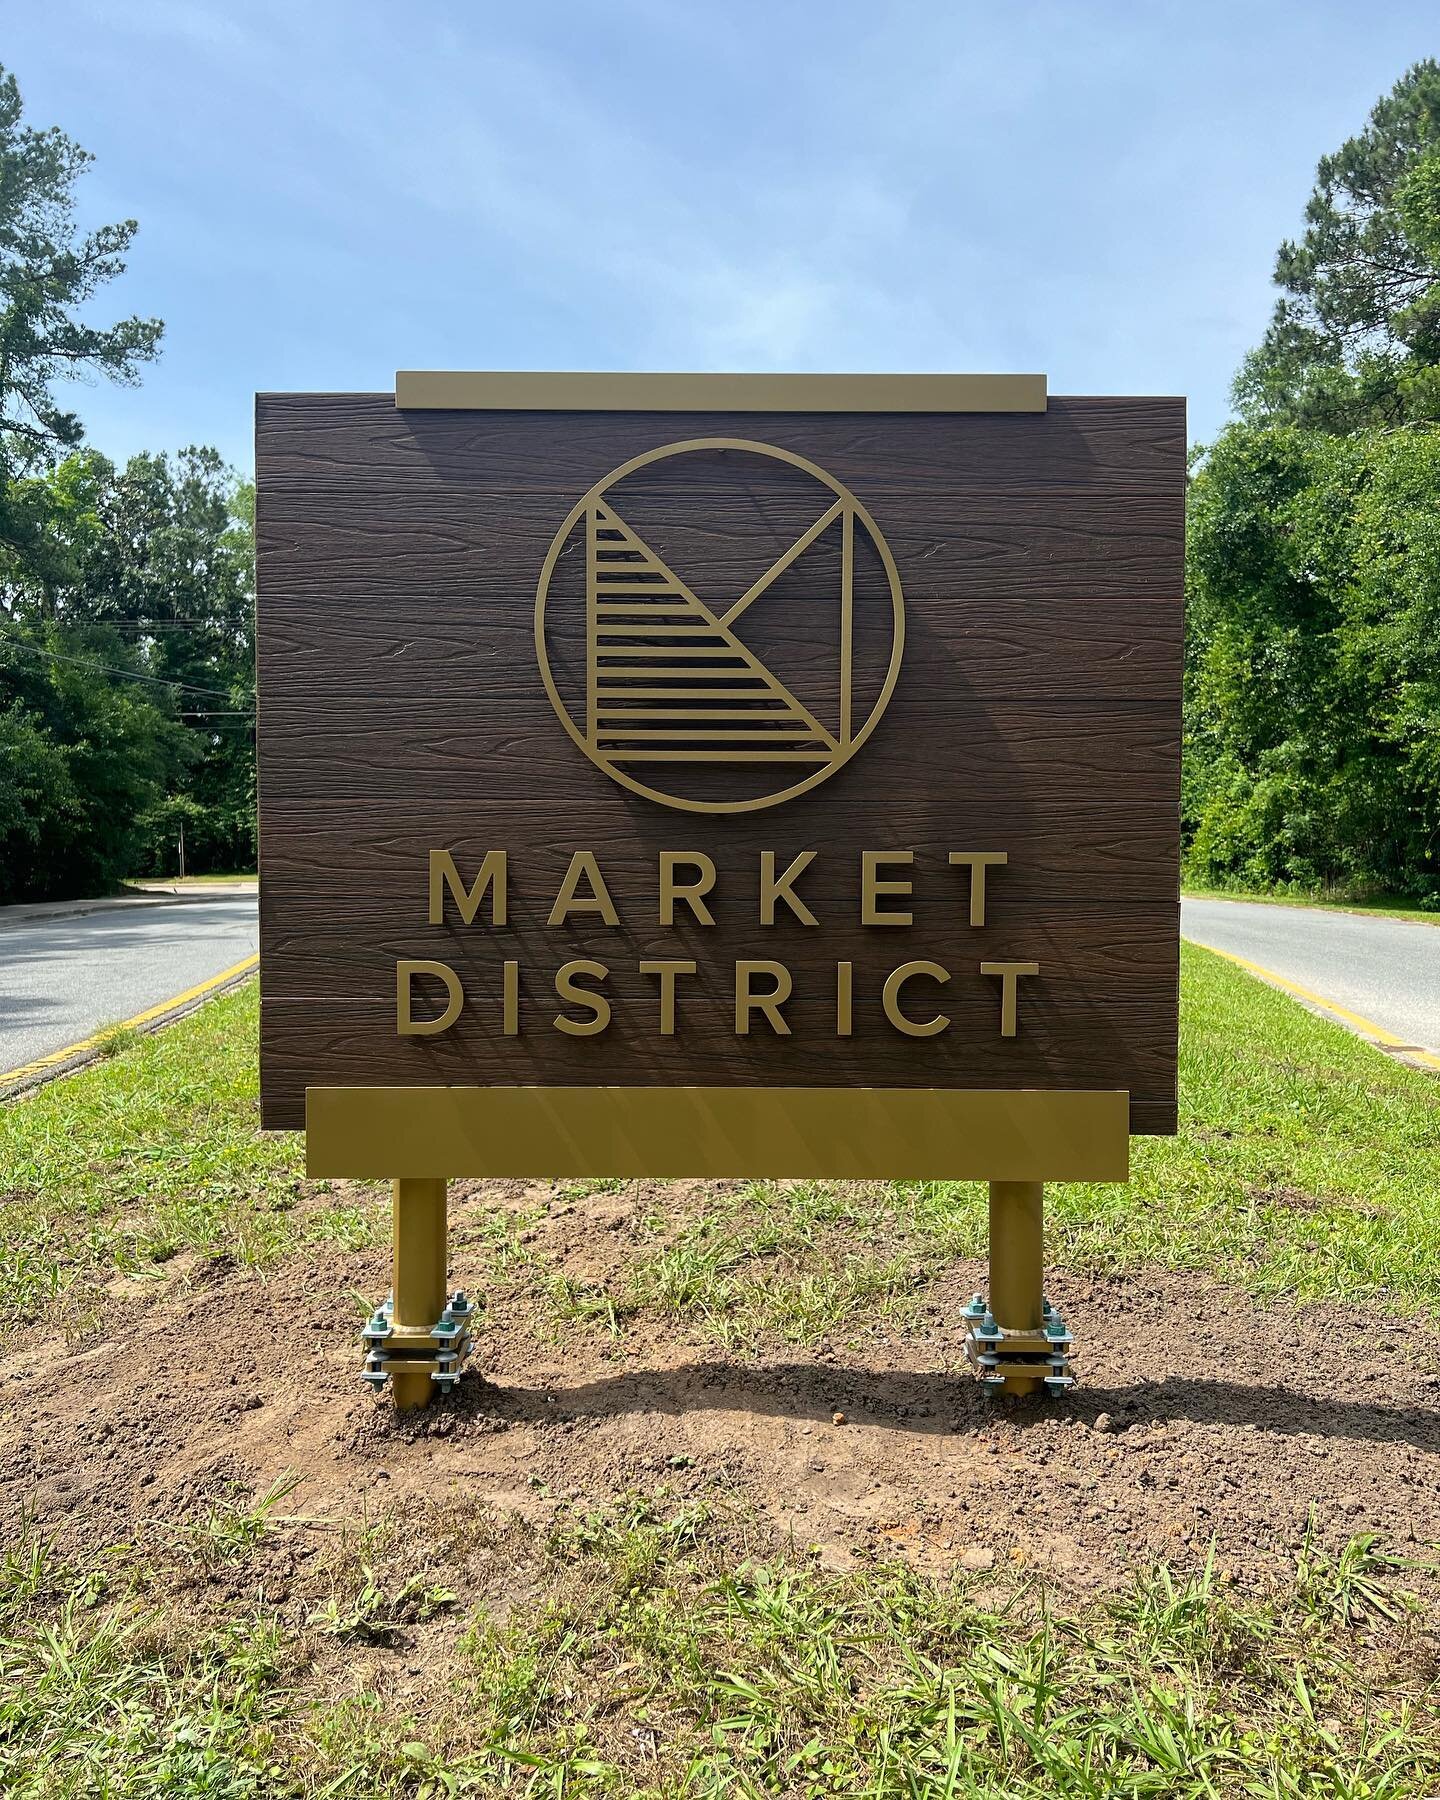 | S I G N A G E

If you visit the Market District today, you will see a couple of new additions. 😍 Our new Market District signage is up on Maclay Boulevard South and Timberlane Road. 

The Market District Association has worked hard in collaboratio